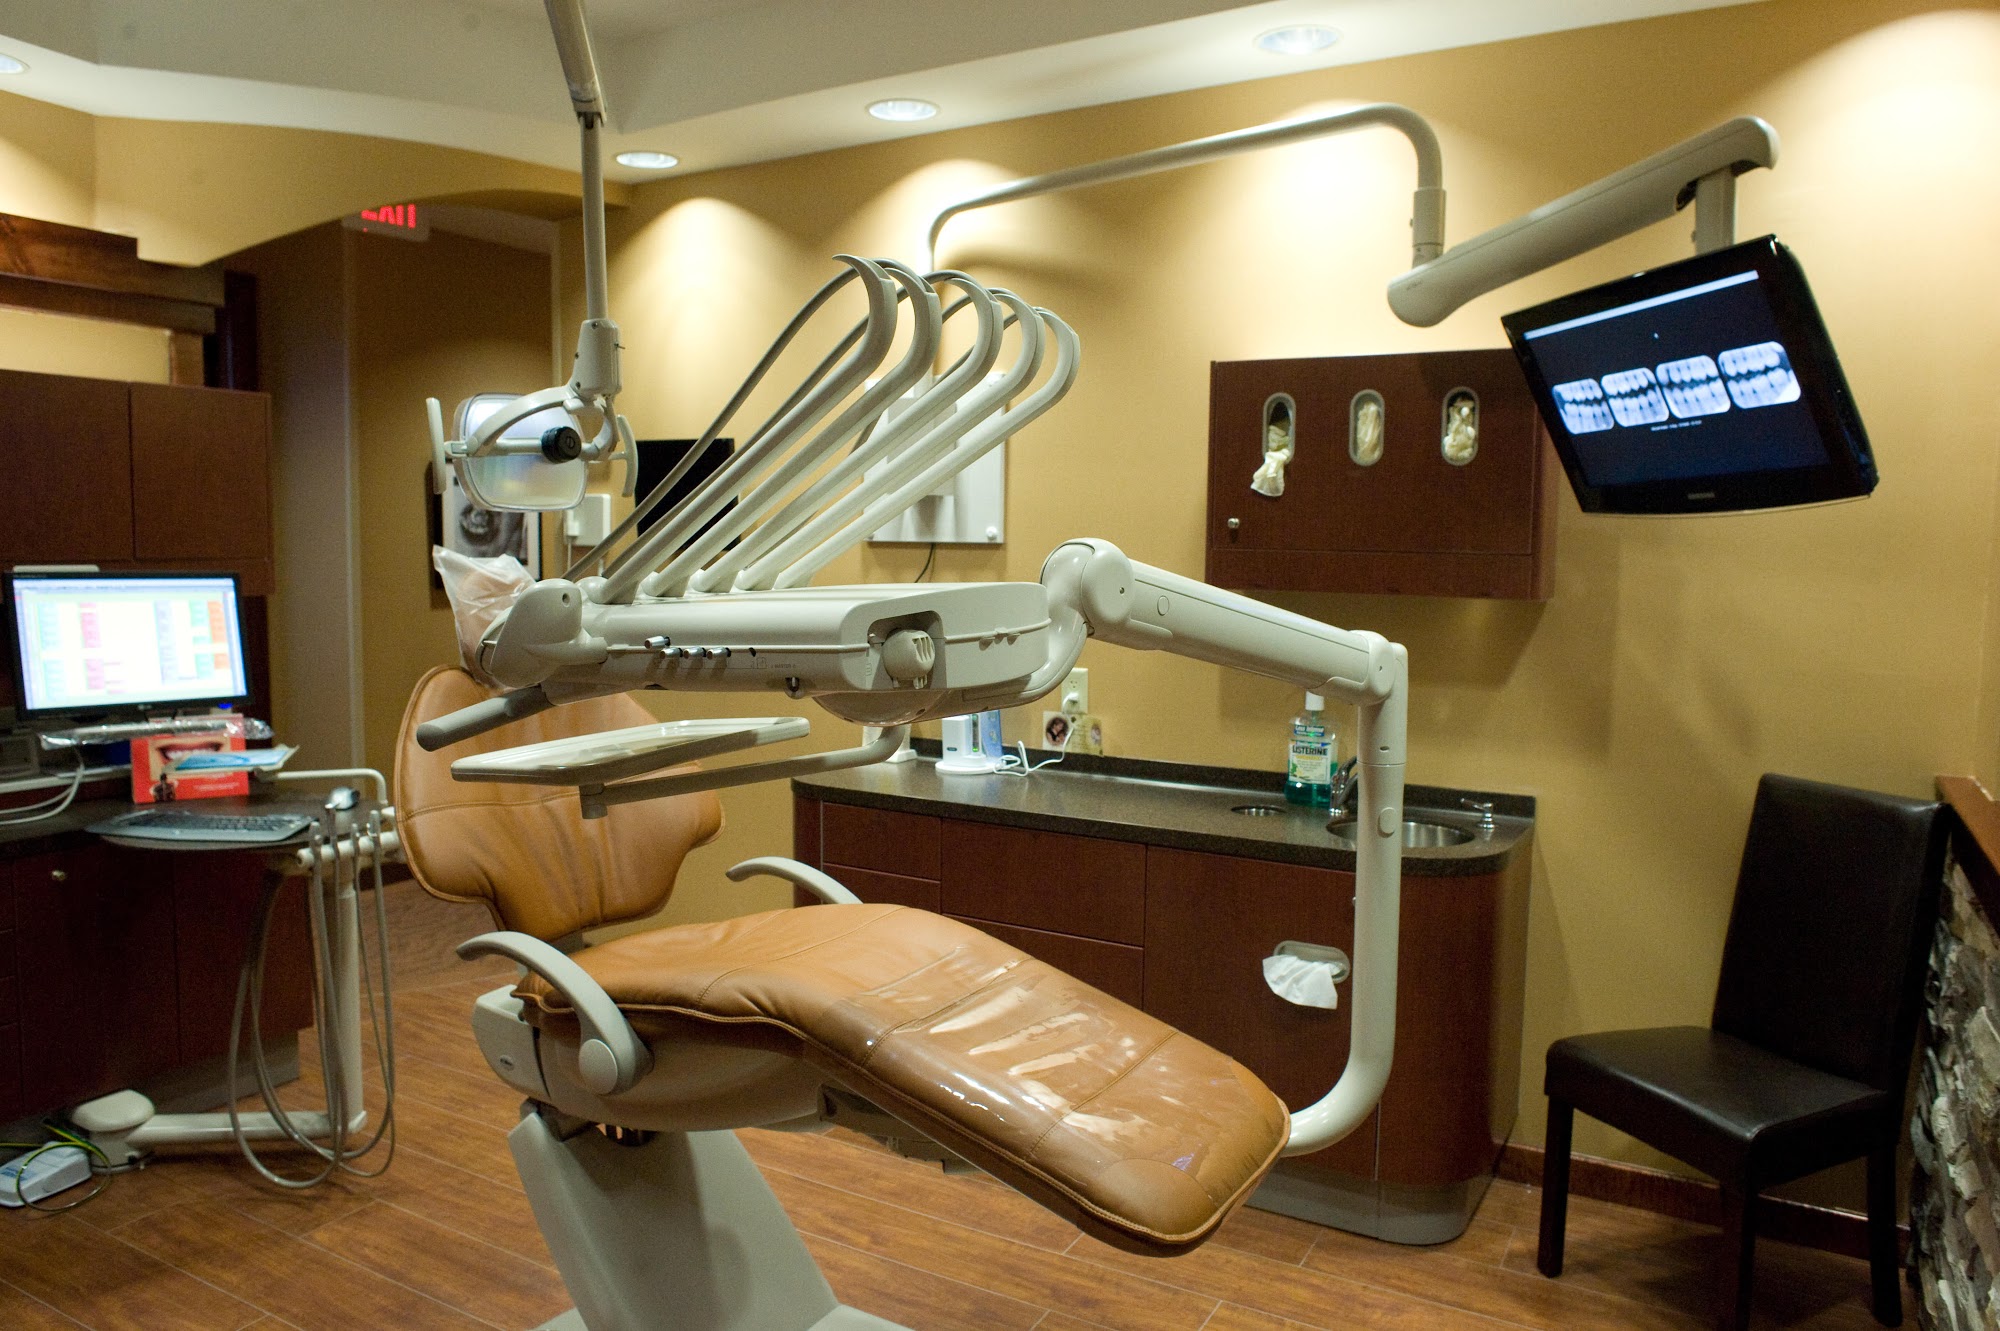 The Art of Dentistry and Spa